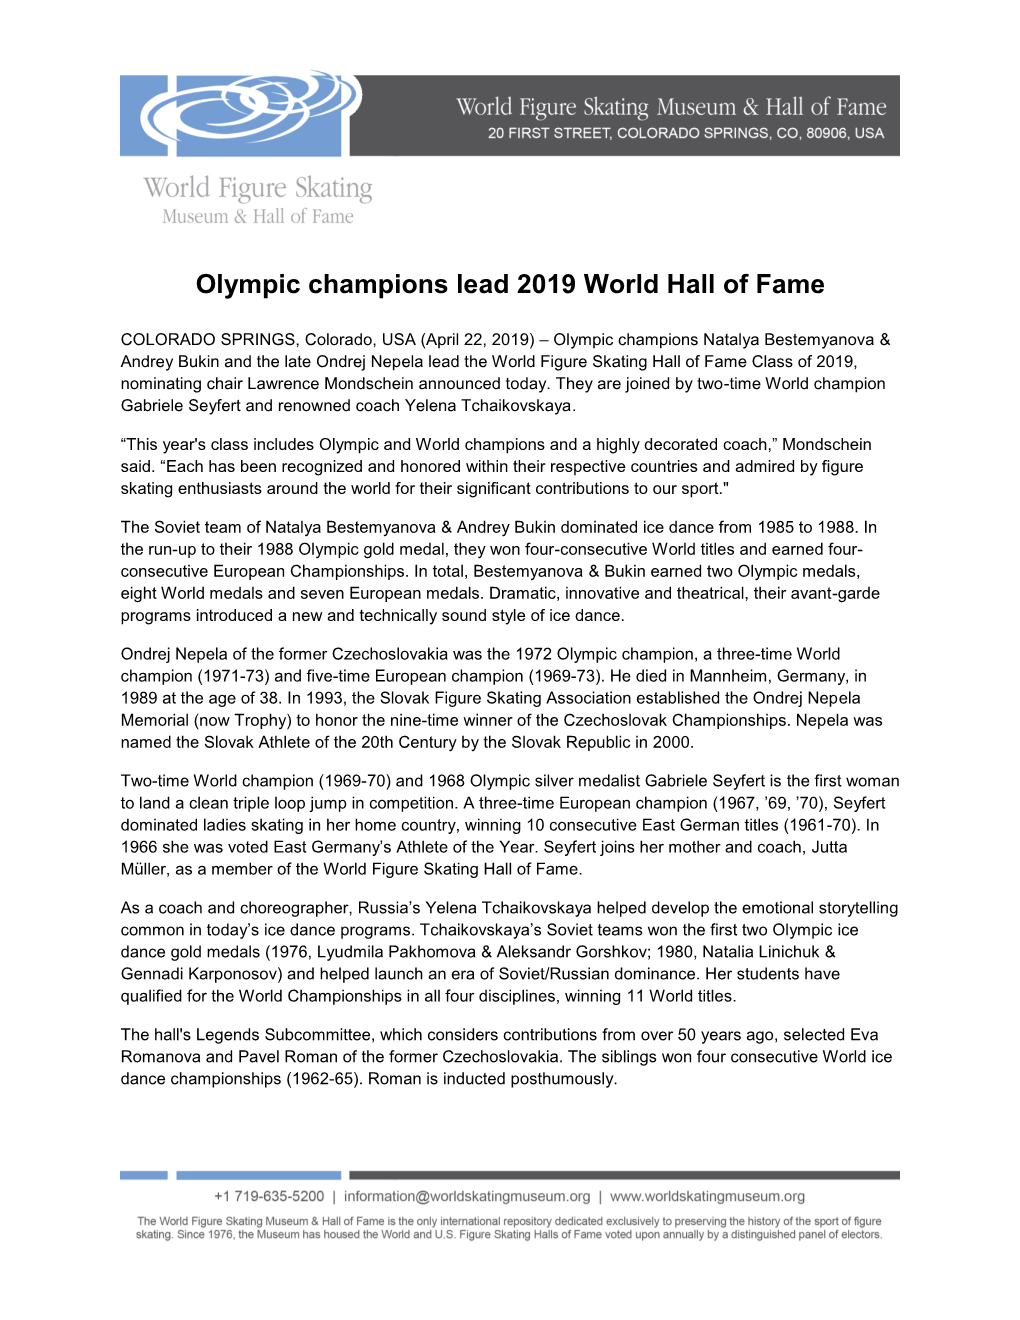 Olympic Champions Lead 2019 World Hall of Fame